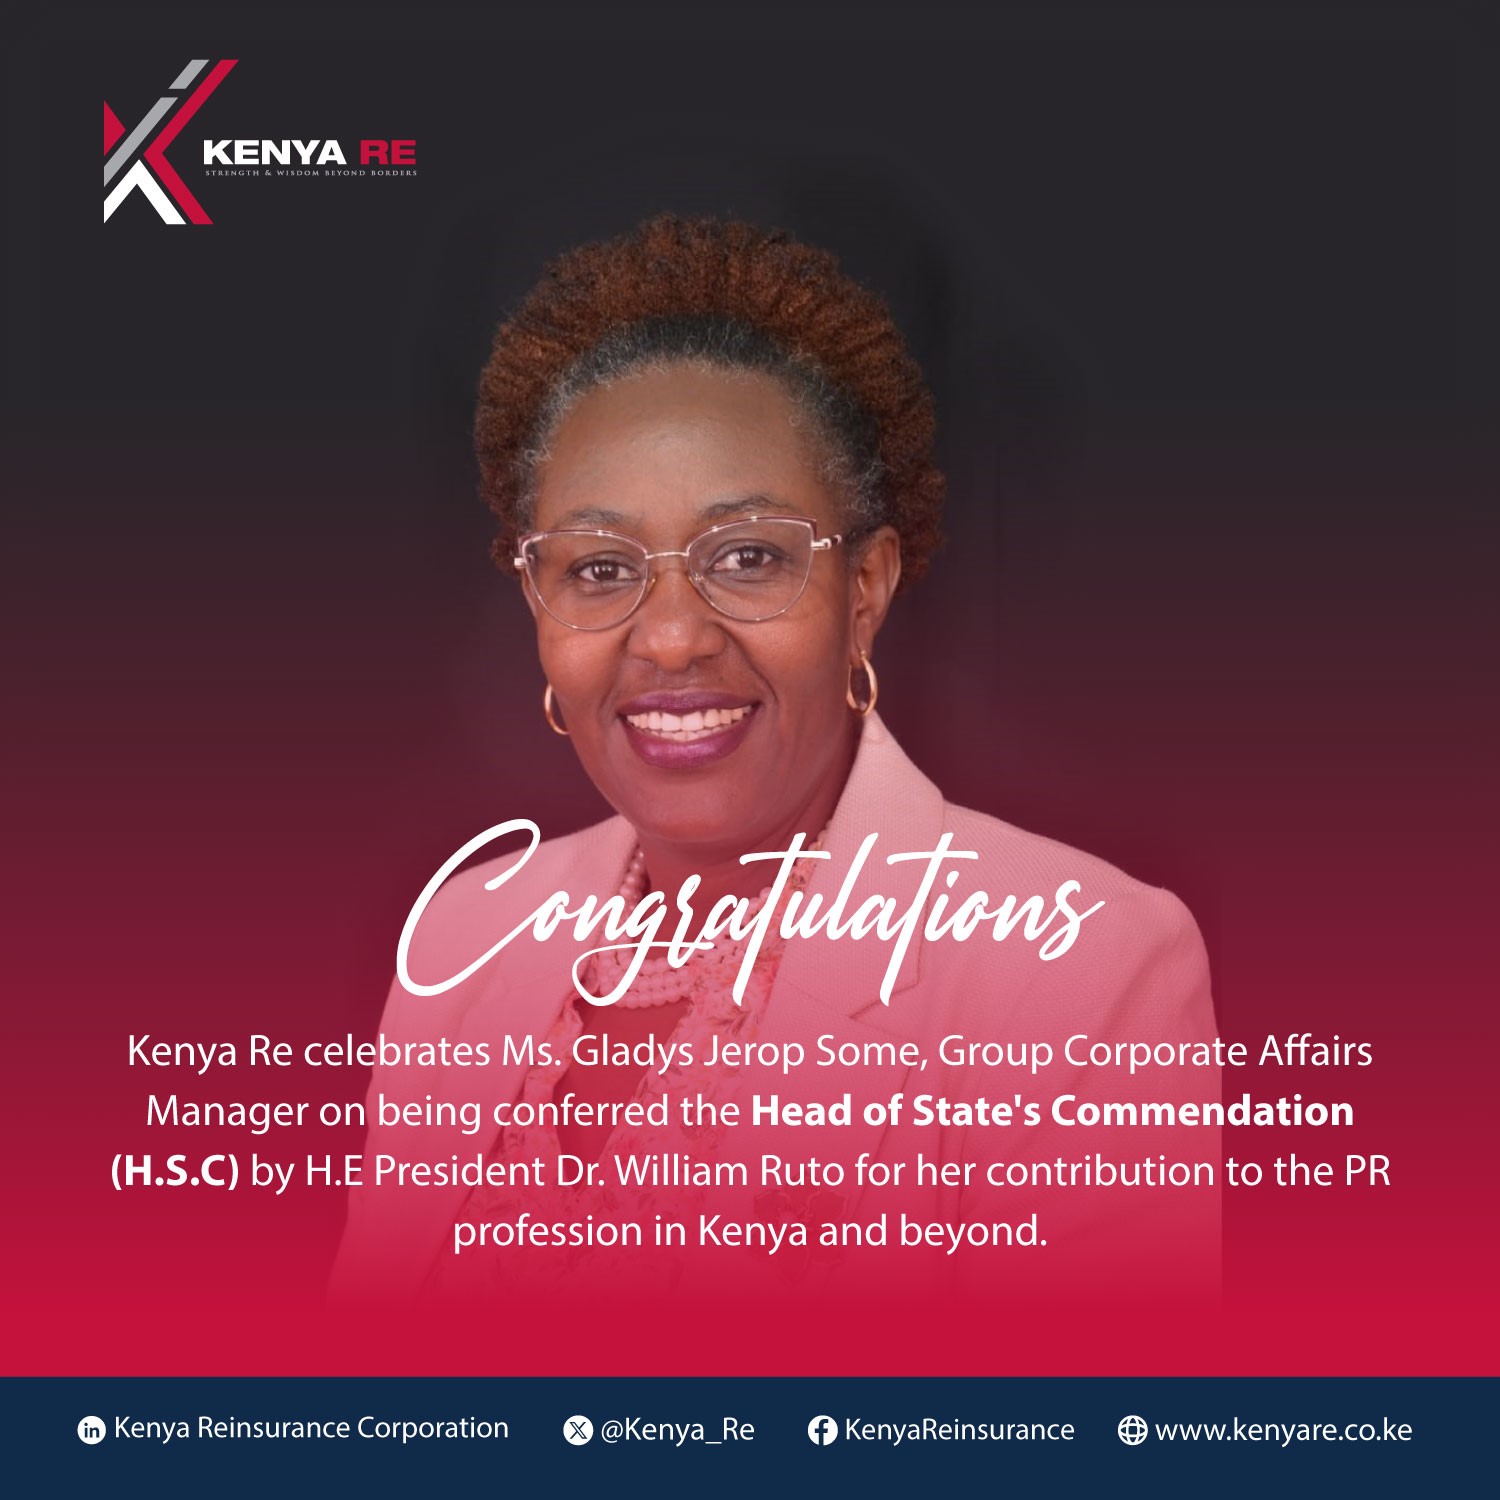 KENYA RE GROUP MANAGER, CORPORATE AFFAIRS, MS. GLADYS JEROP SOME CONFERRED WITH HEAD OF STATE'S COMMENDATION (H.S.C)